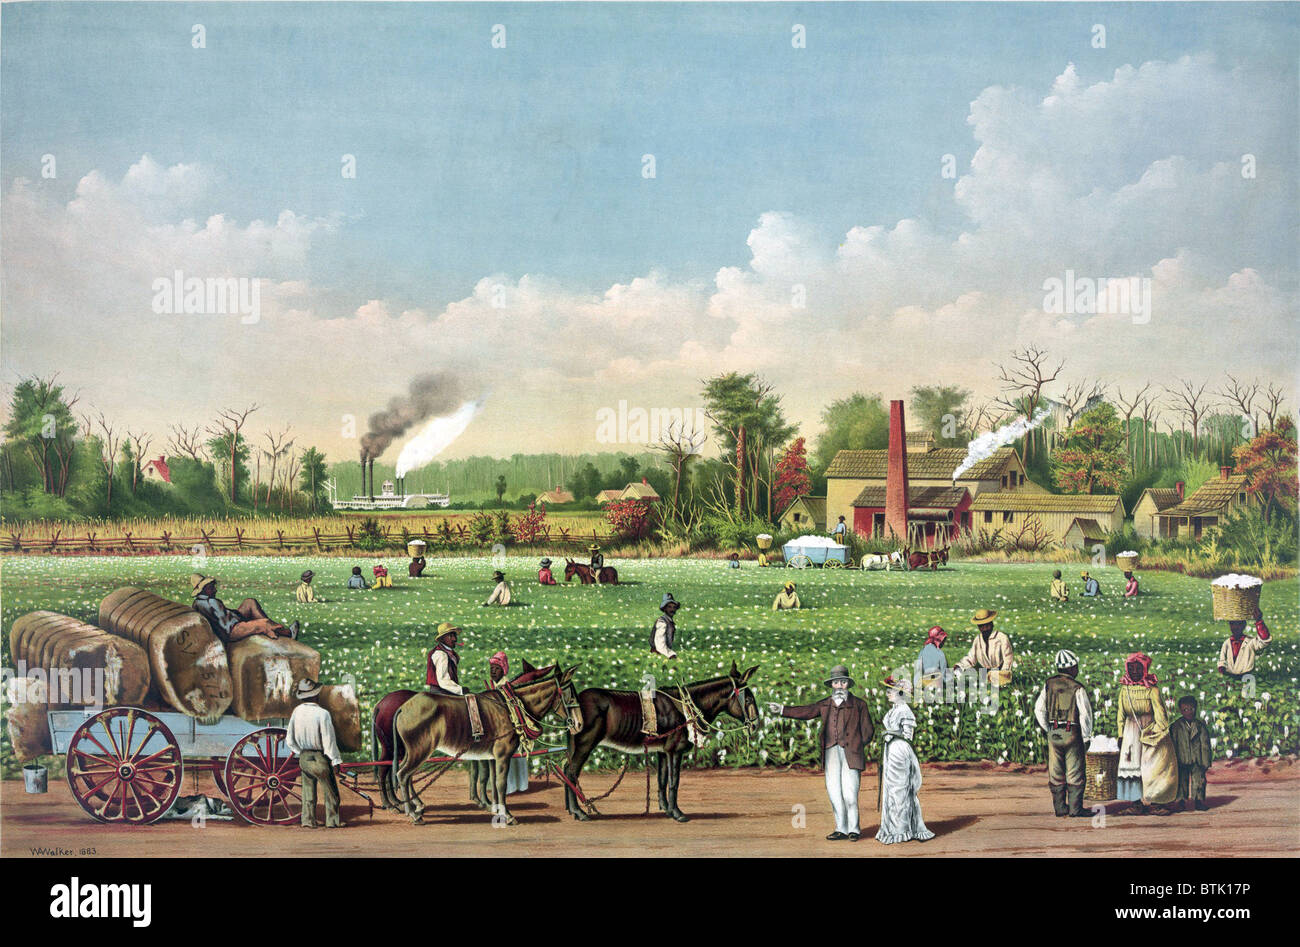 Idealized view of cotton plantation on the Mississippi River, with African American workers. Evocative of Southern antebellum era of pre-Civil War prosperity and slavery. Color lithograph, 1884 Stock Photo